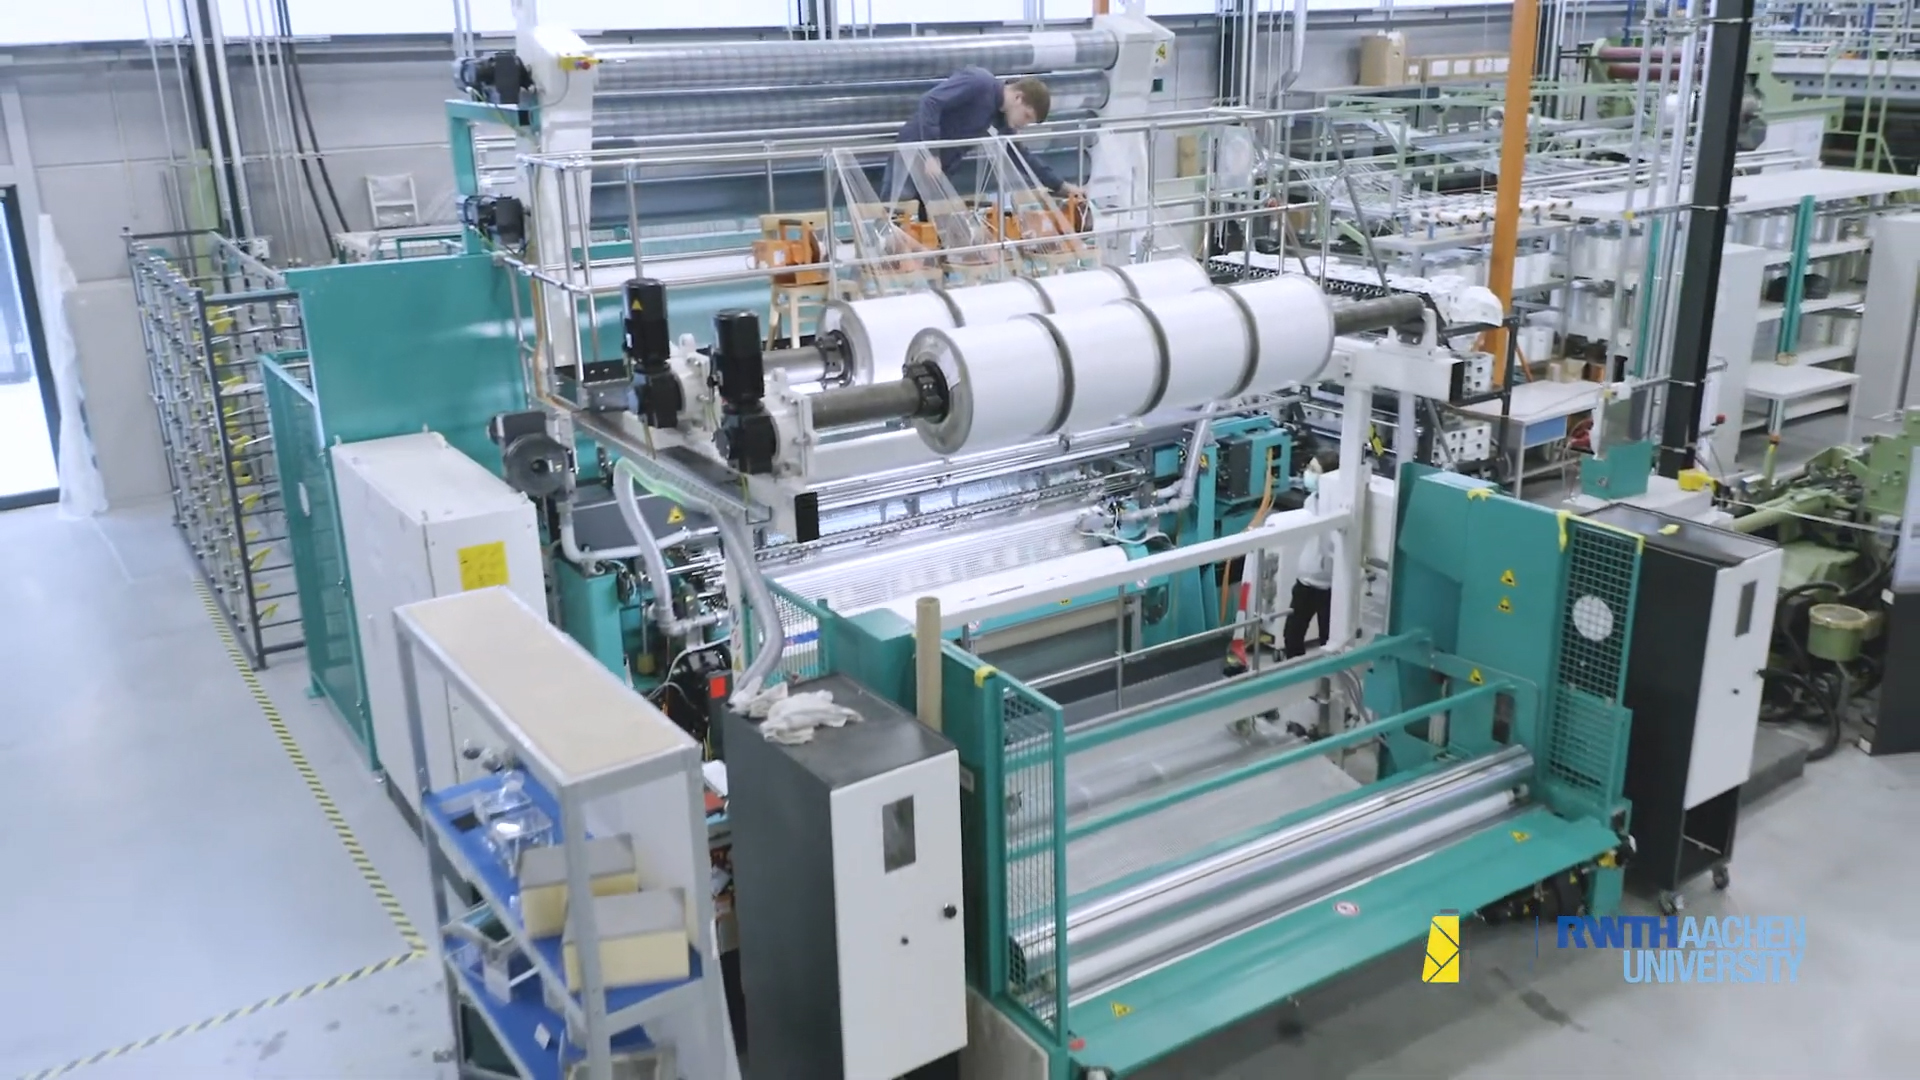 The Aachen ITA has installed a special Karl Mayer Biaxtronic warp knitting machine for the production and further development of 2D and 3D structures for TRC. © ITA Aachen